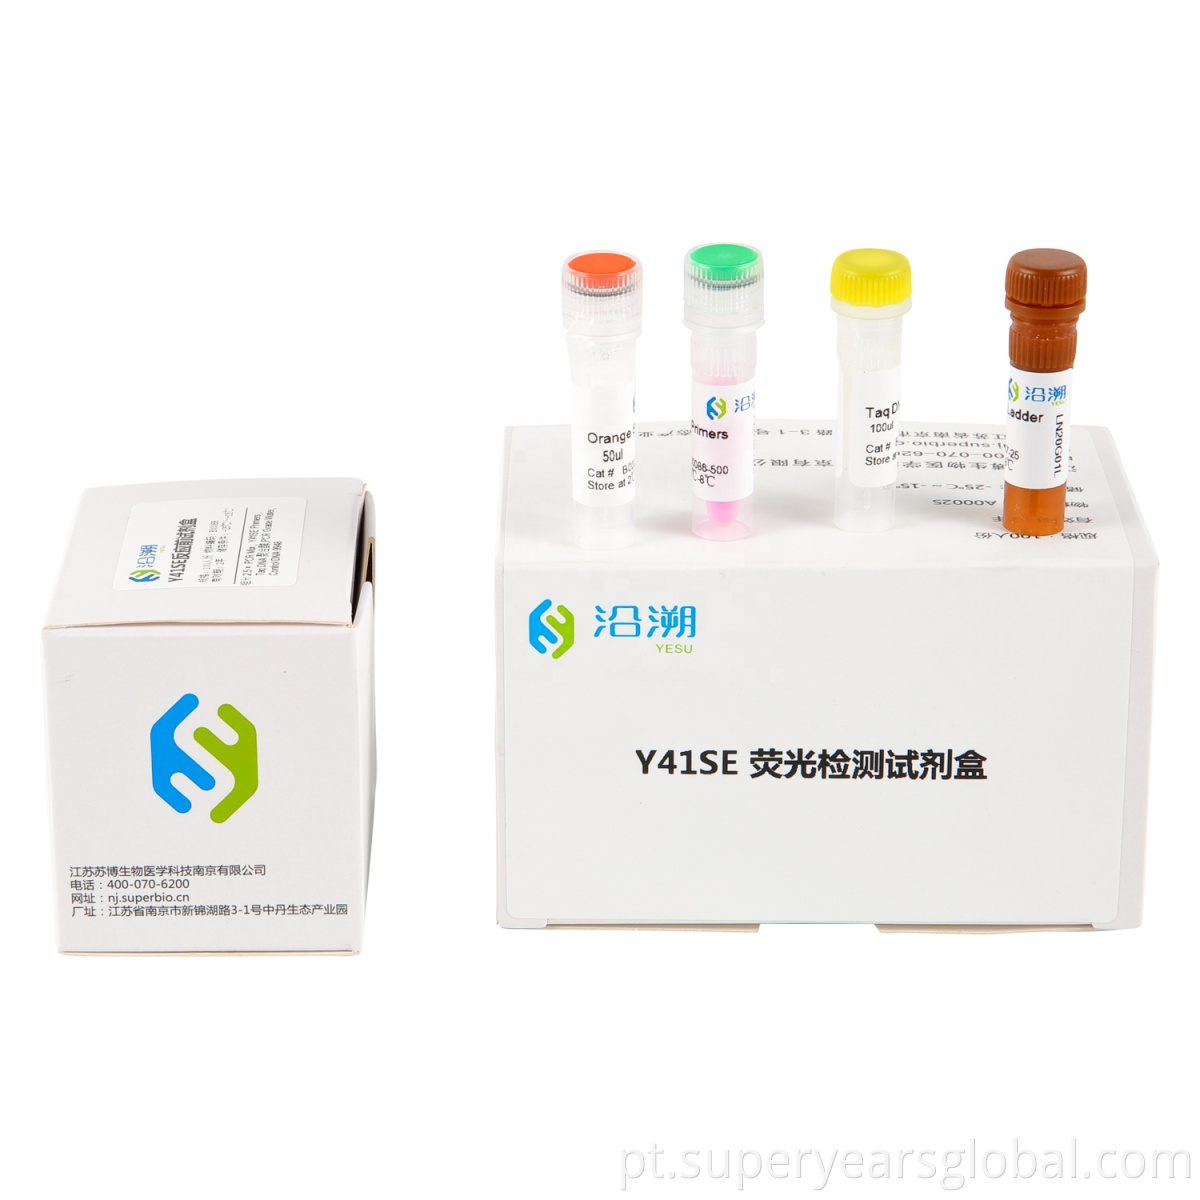 Dna Extraction Kit